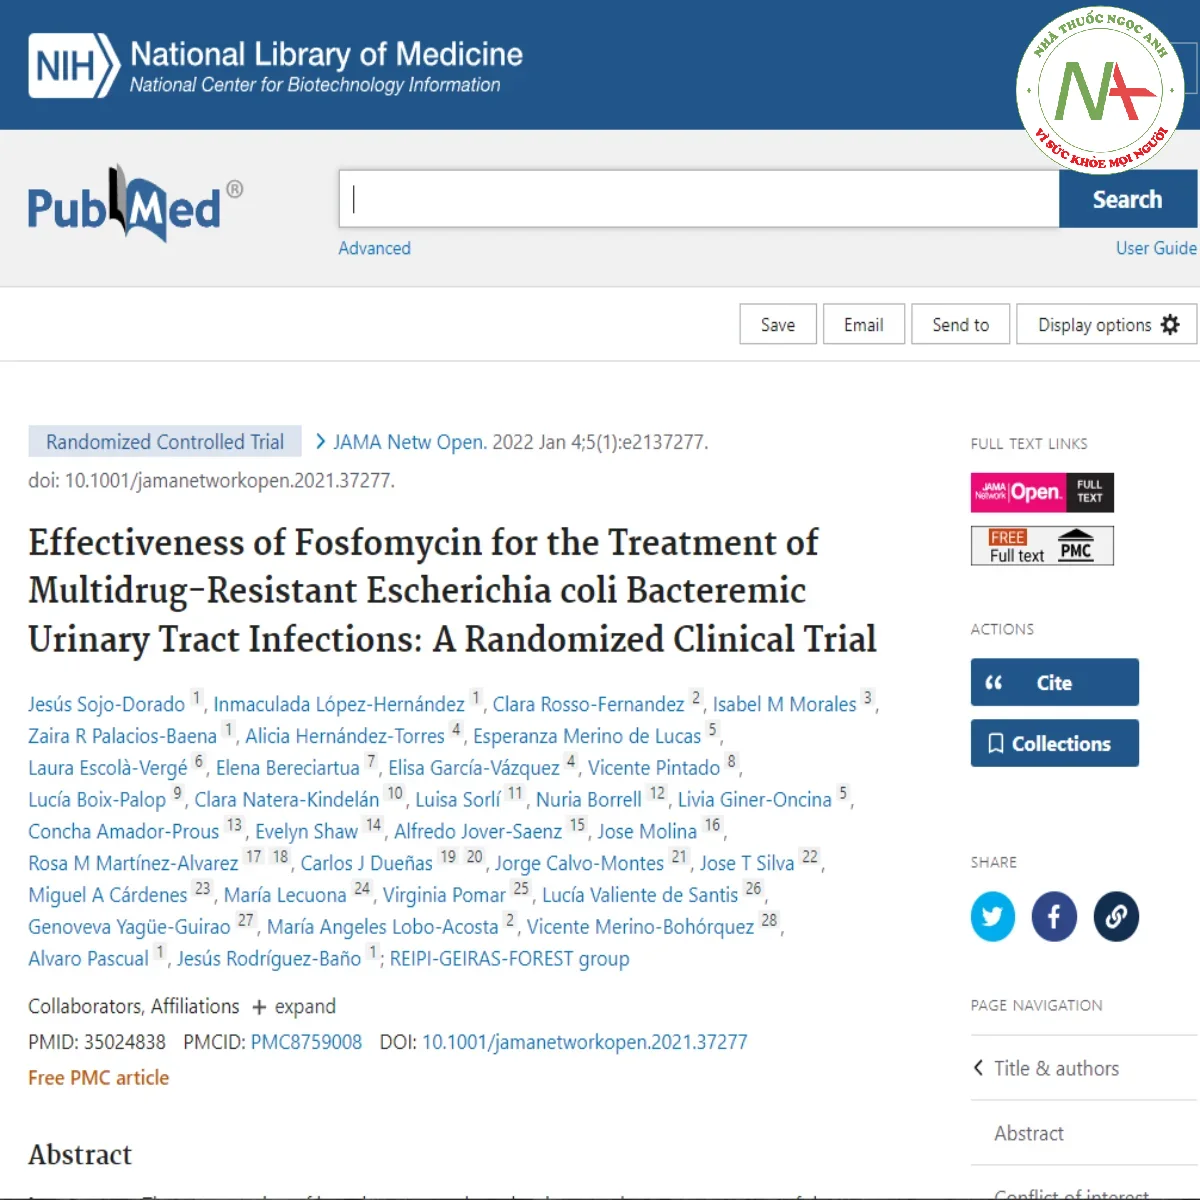 Effectiveness of Fosfomycin for the Treatment of Multidrug-Resistant Escherichia coli Bacteremic Urinary Tract Infections: A Randomized Clinical Trial